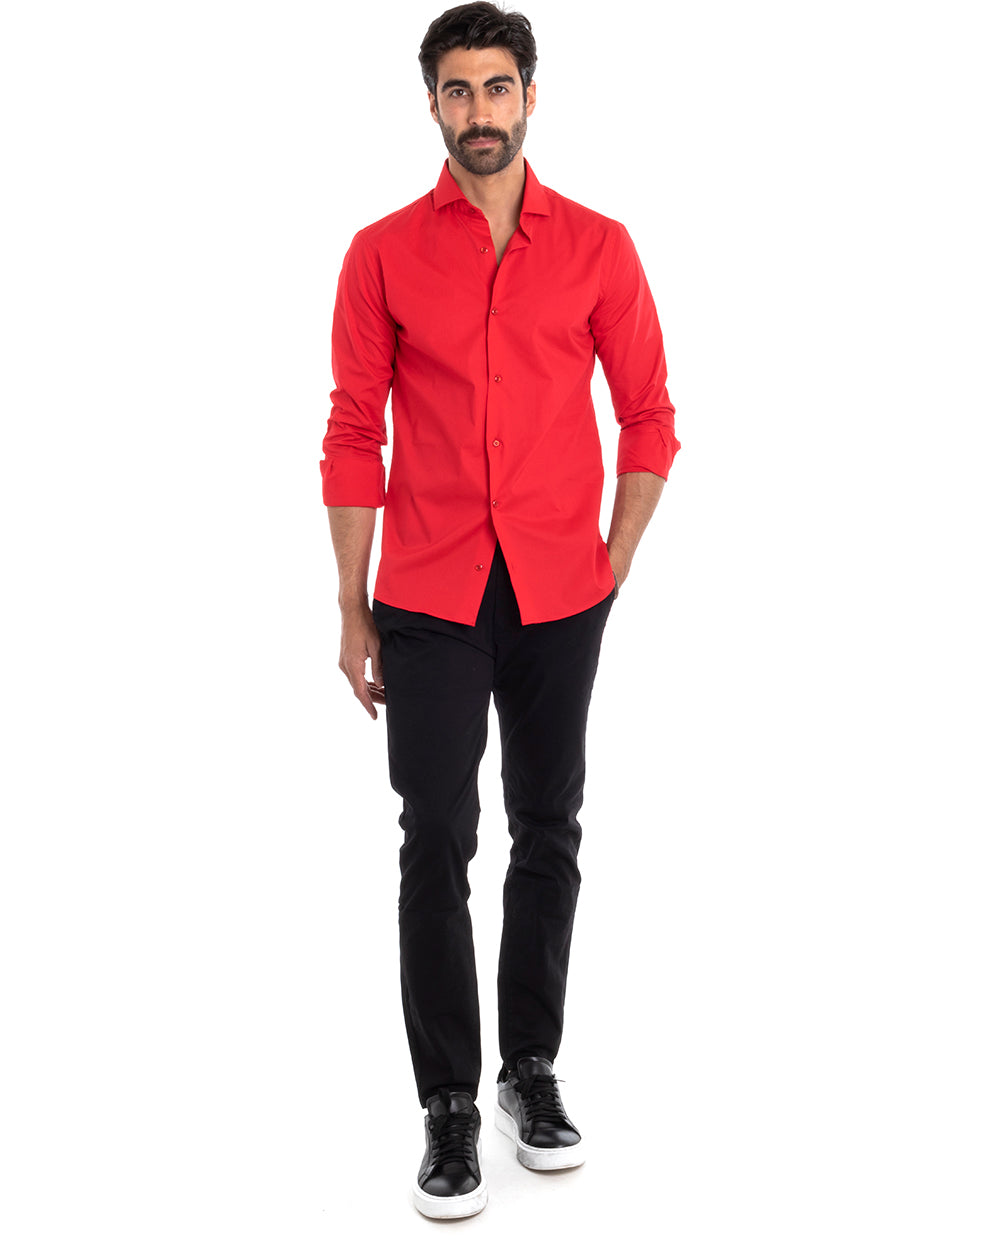 Men's Tailored Shirt With Collar Long Sleeve Basic Soft Cotton Red Regular Fit GIOSAL-C2397A